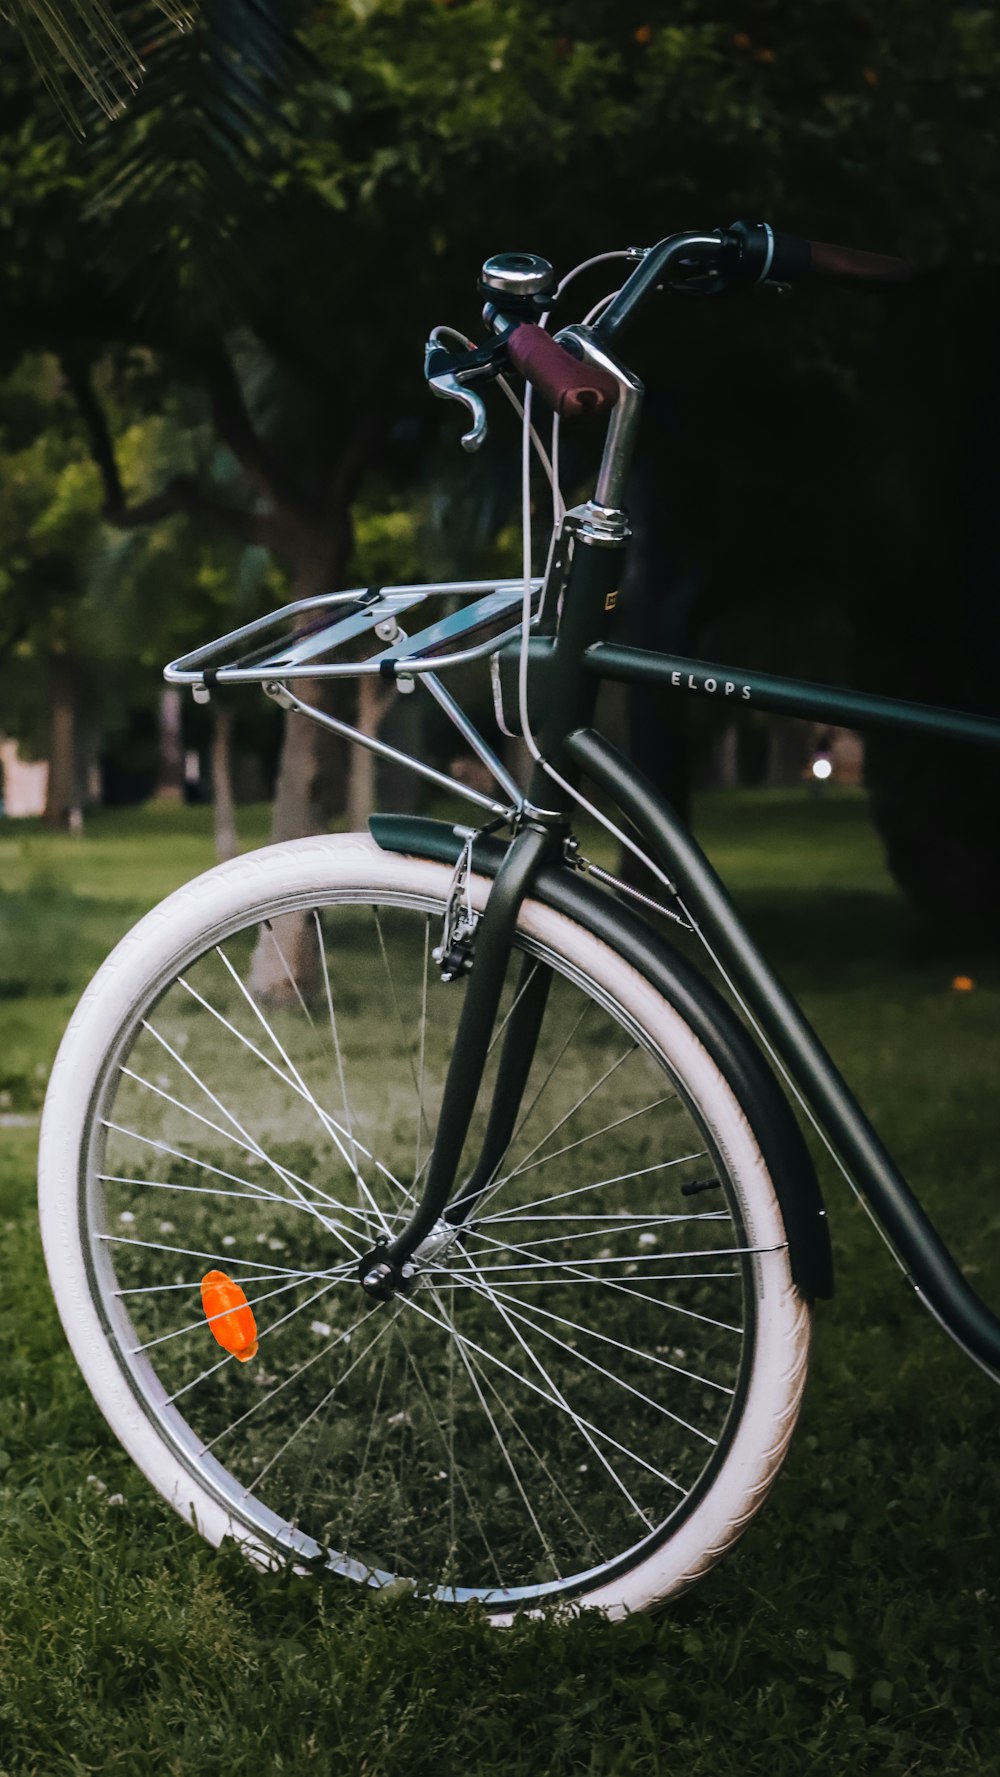 a close up of a bicycle parked in the grass